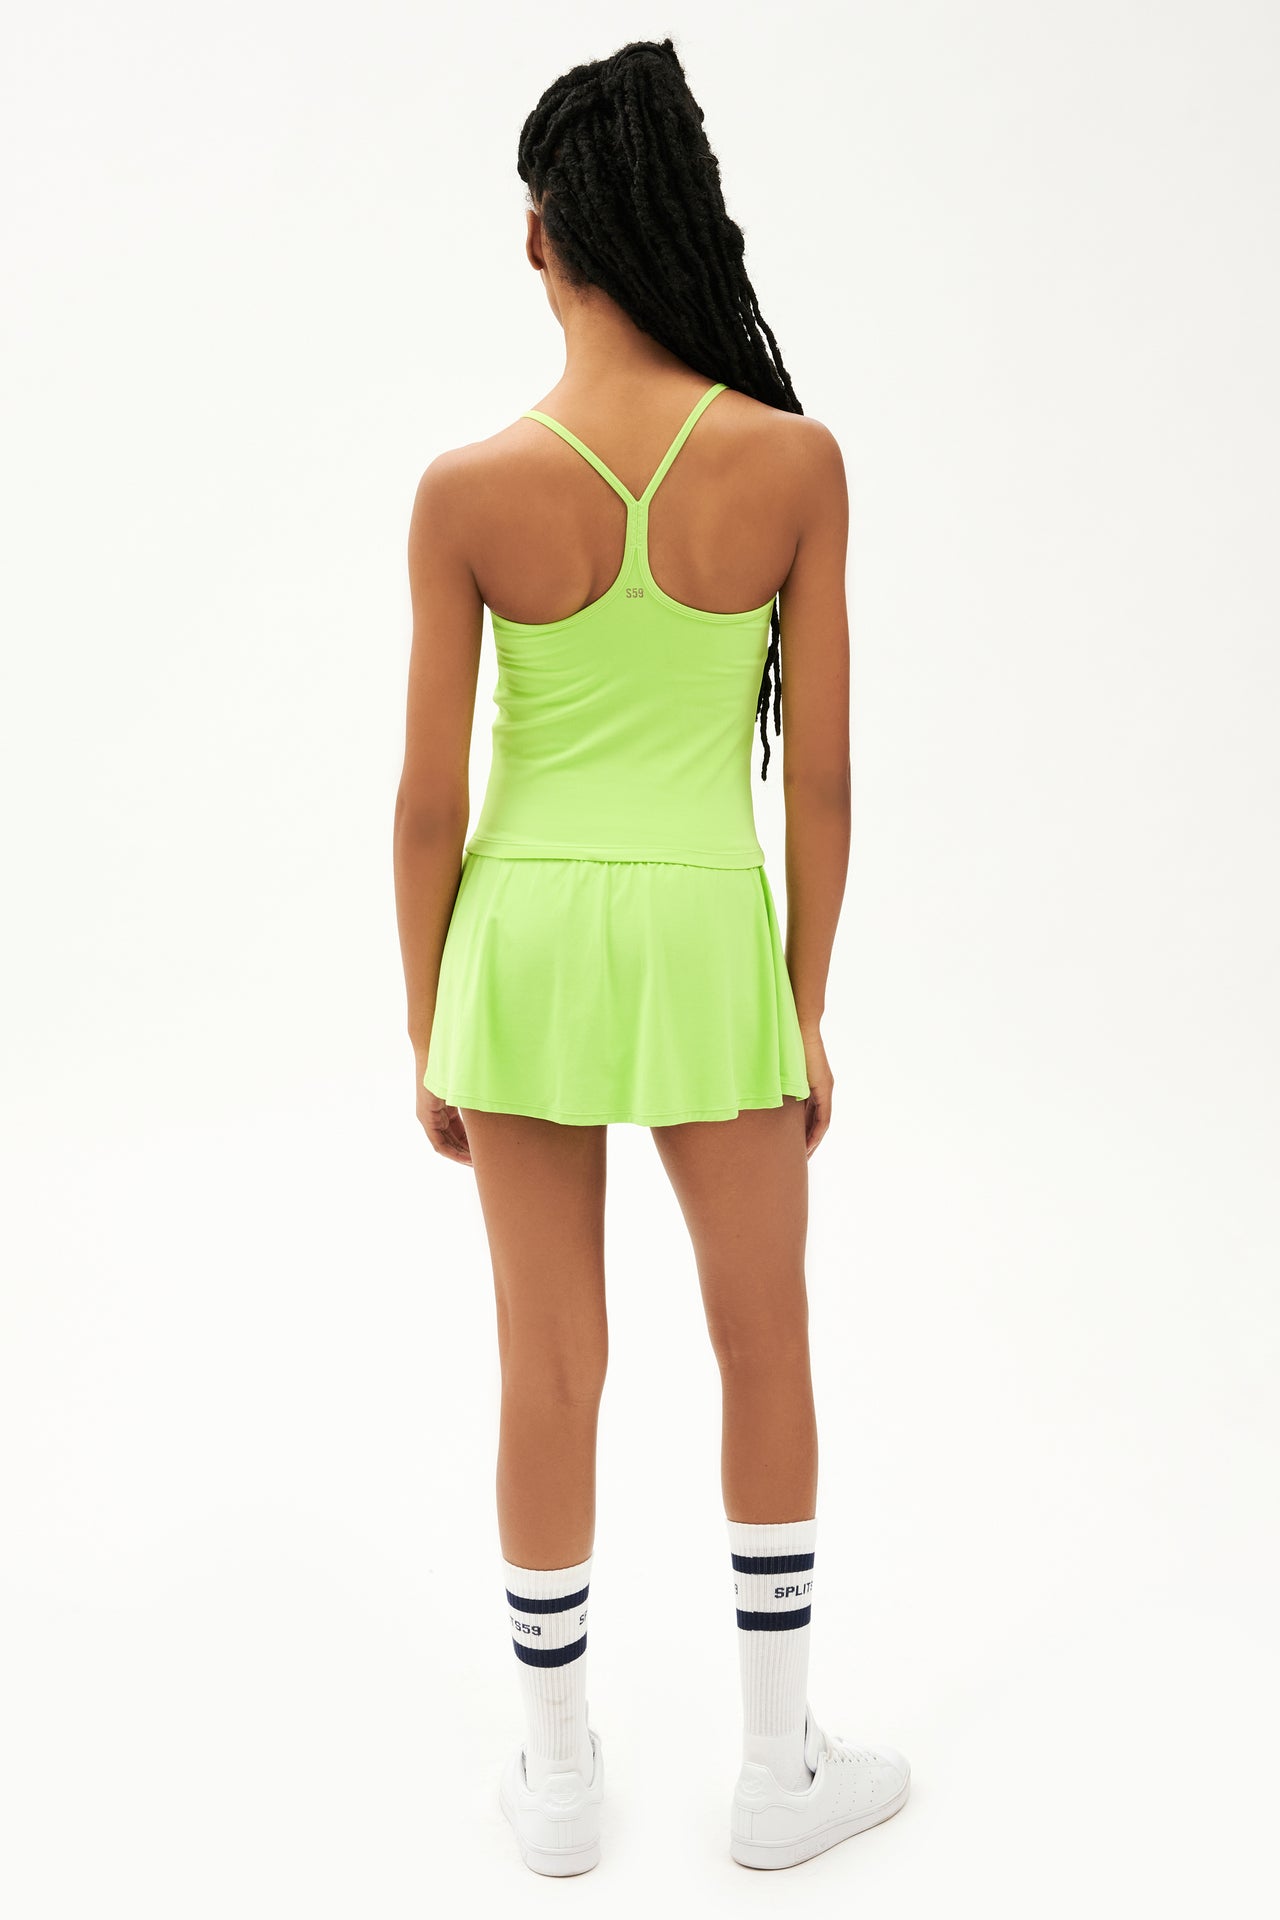 Full back view of neon green upper thigh skirt with built in shorts, neon green tank top and white shoes